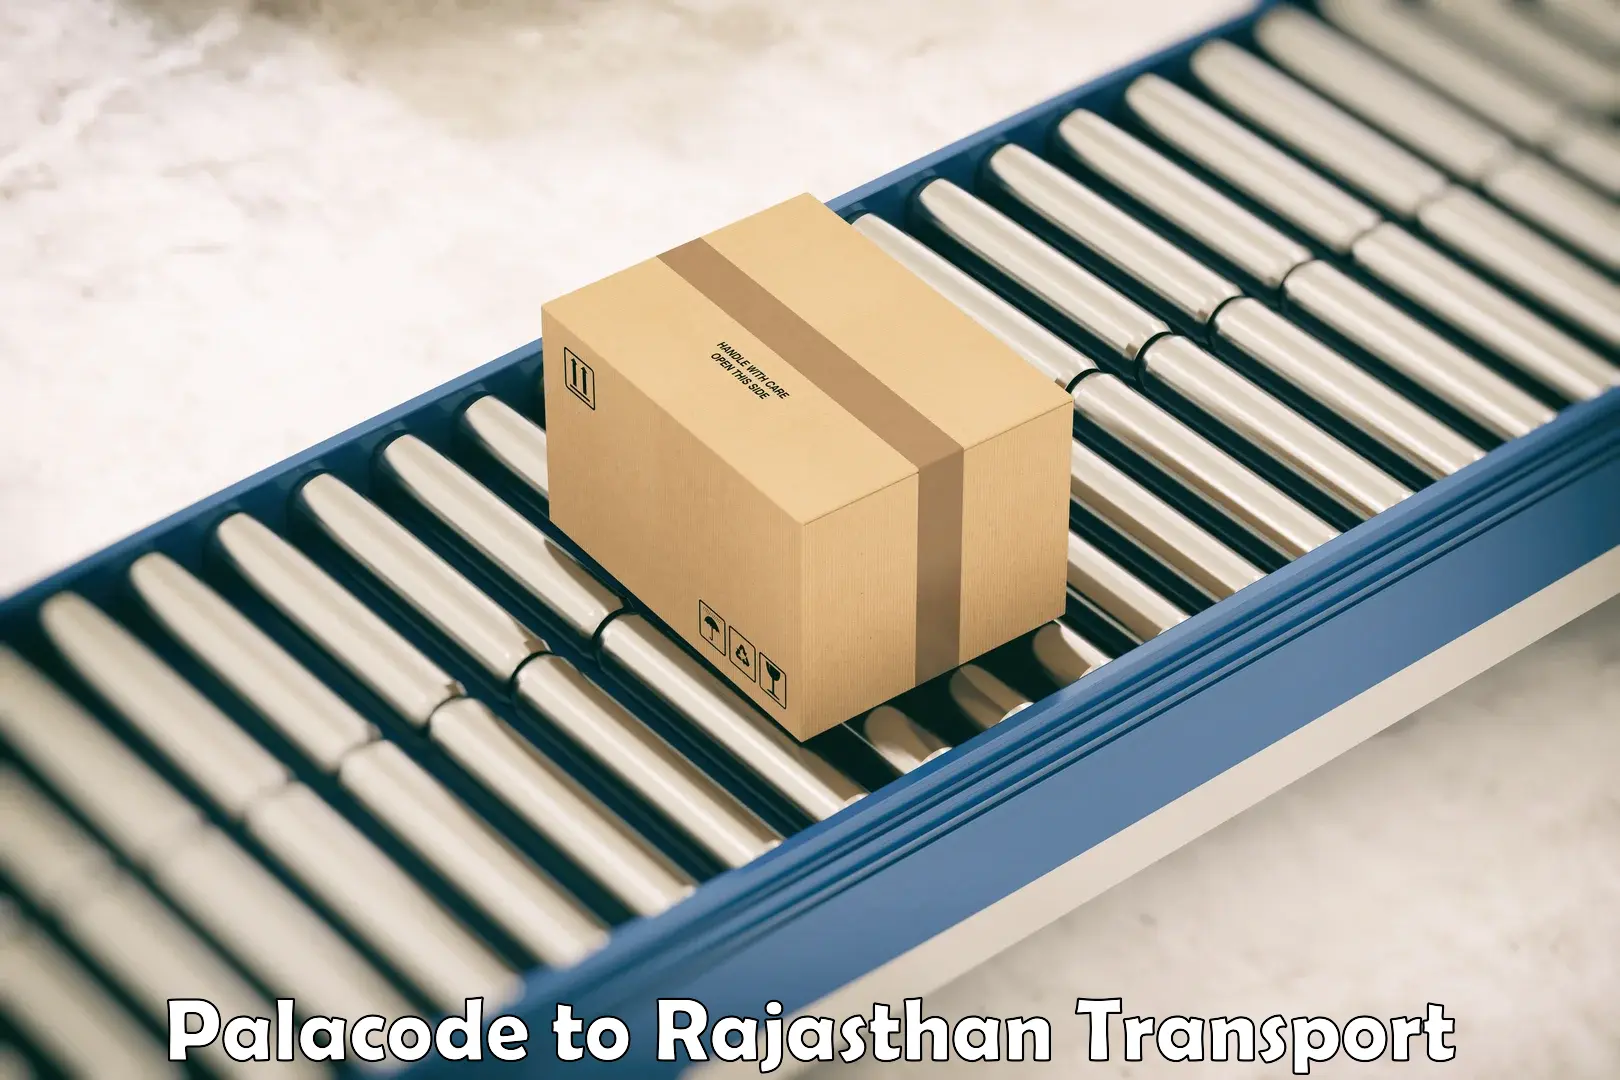 Furniture transport service Palacode to Piparcity